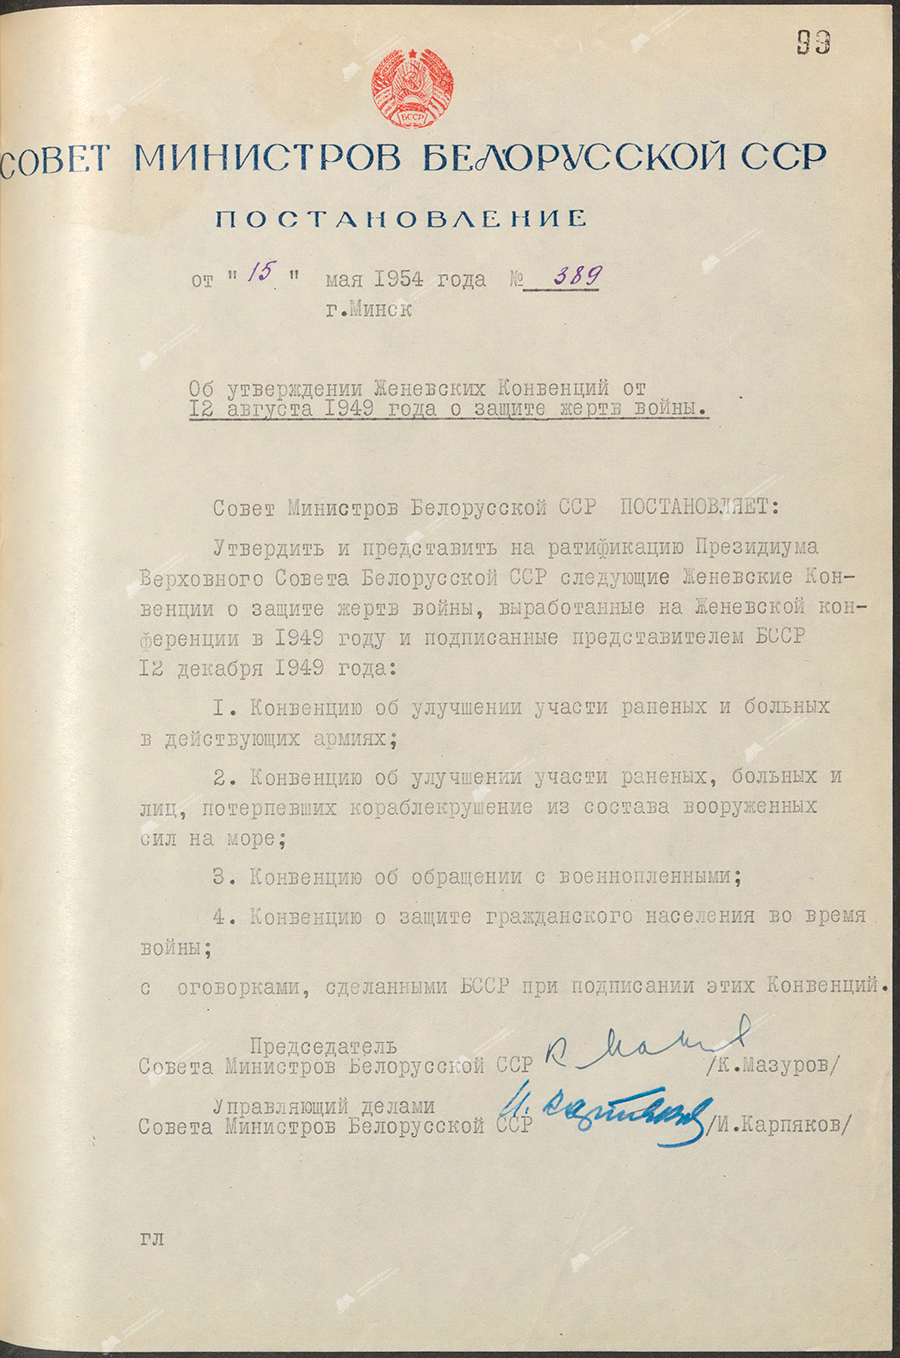 Resolution No. 389 of the Council of Ministers of the Byelorussian SSR «On approval of the Geneva Conventions of August 12, 1949 for the protection of war victims»-стр. 0